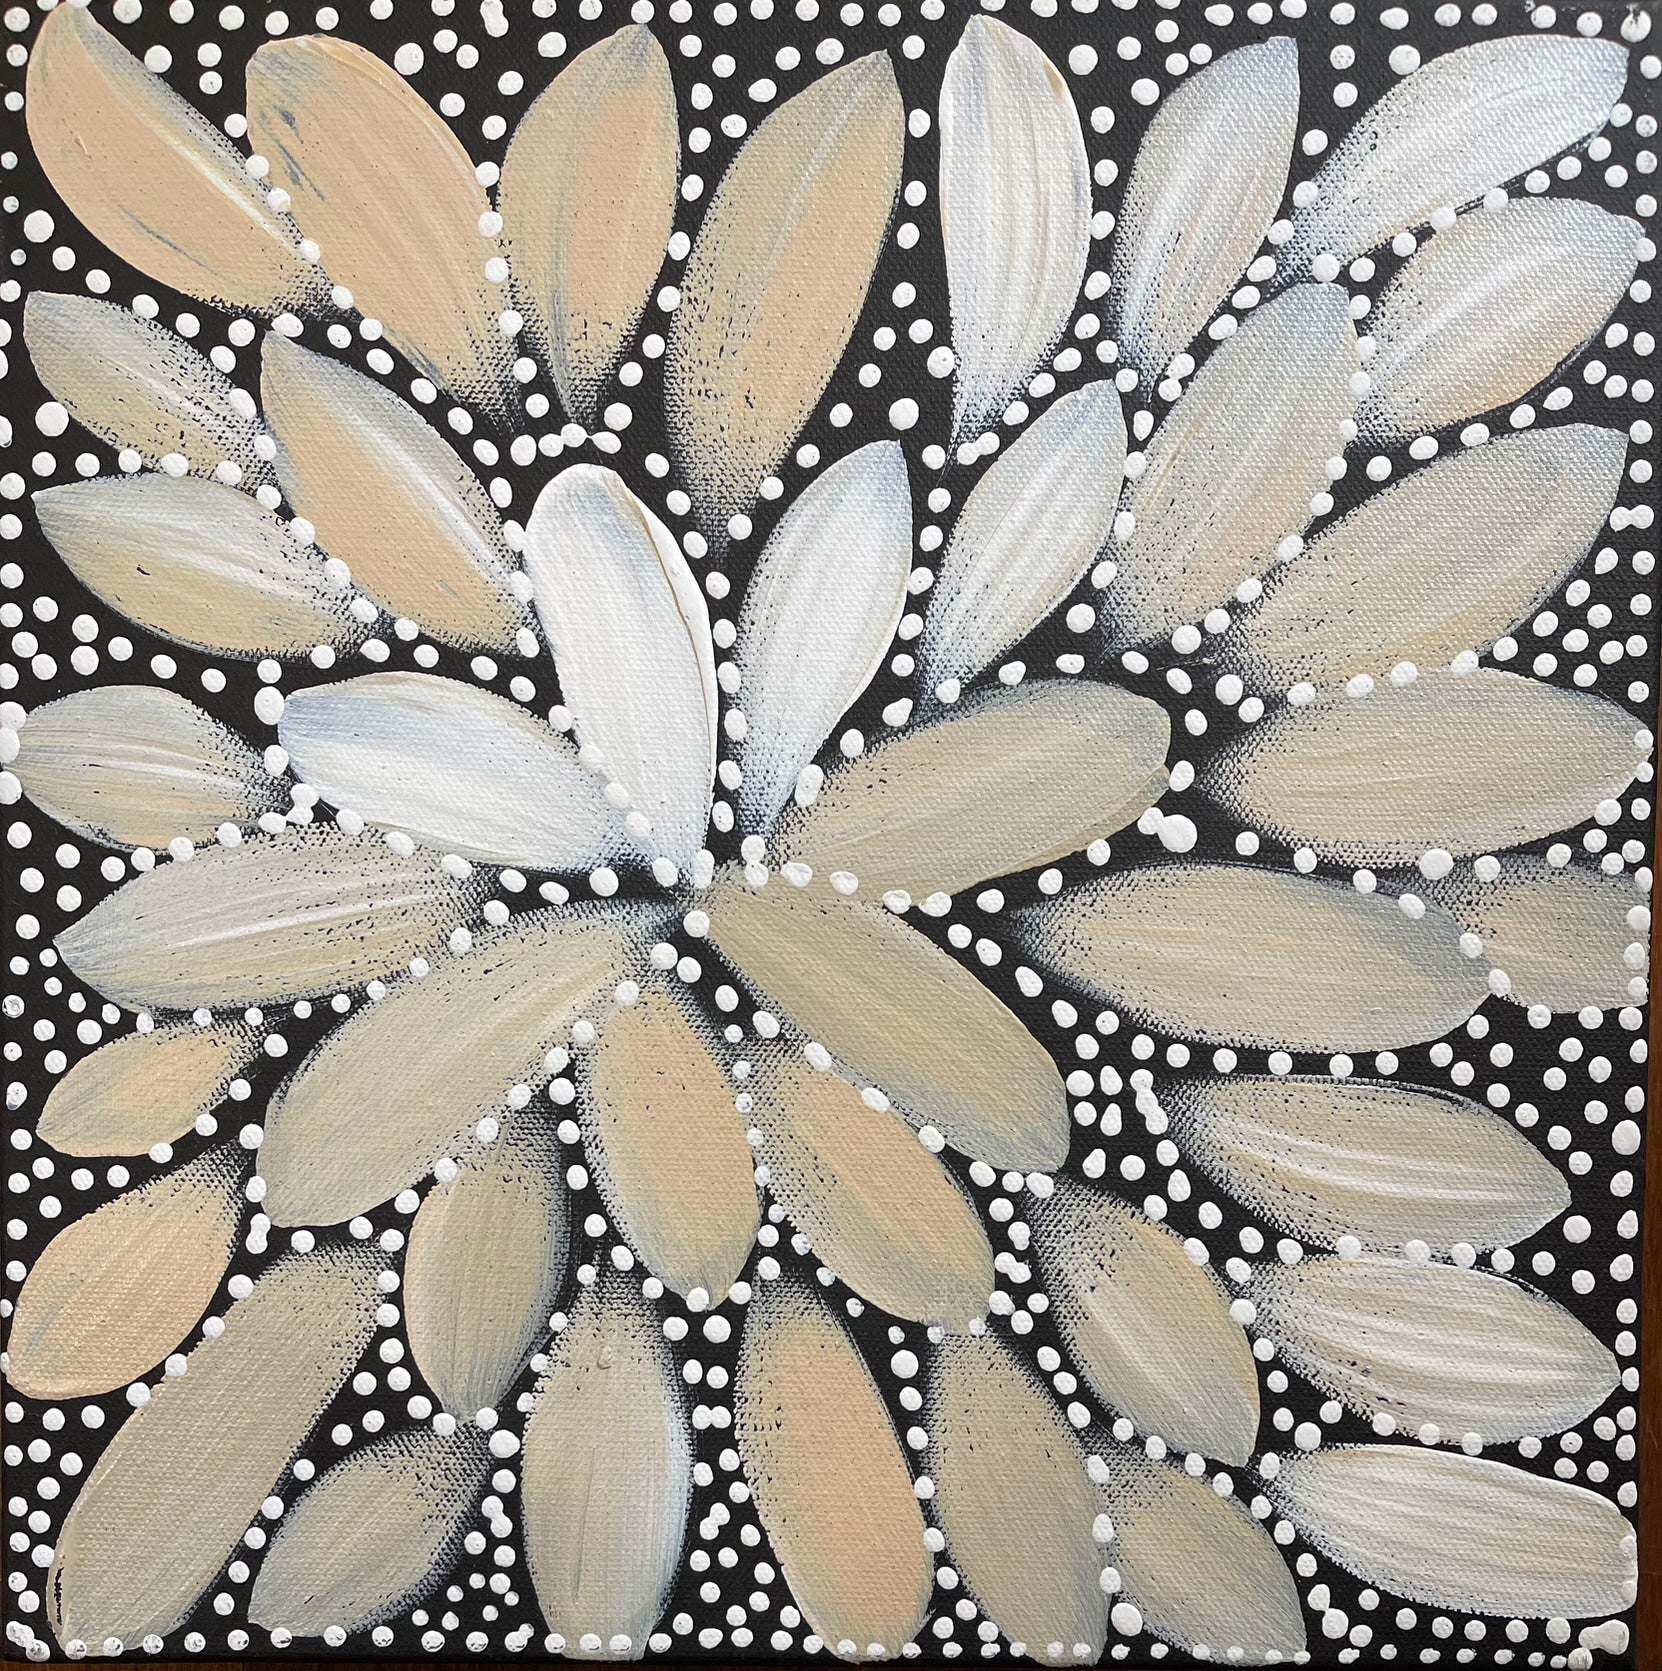 Louise Numina - Bush Medicine Leaves - 30x30cm .30-38 Stretched Ready to Hang